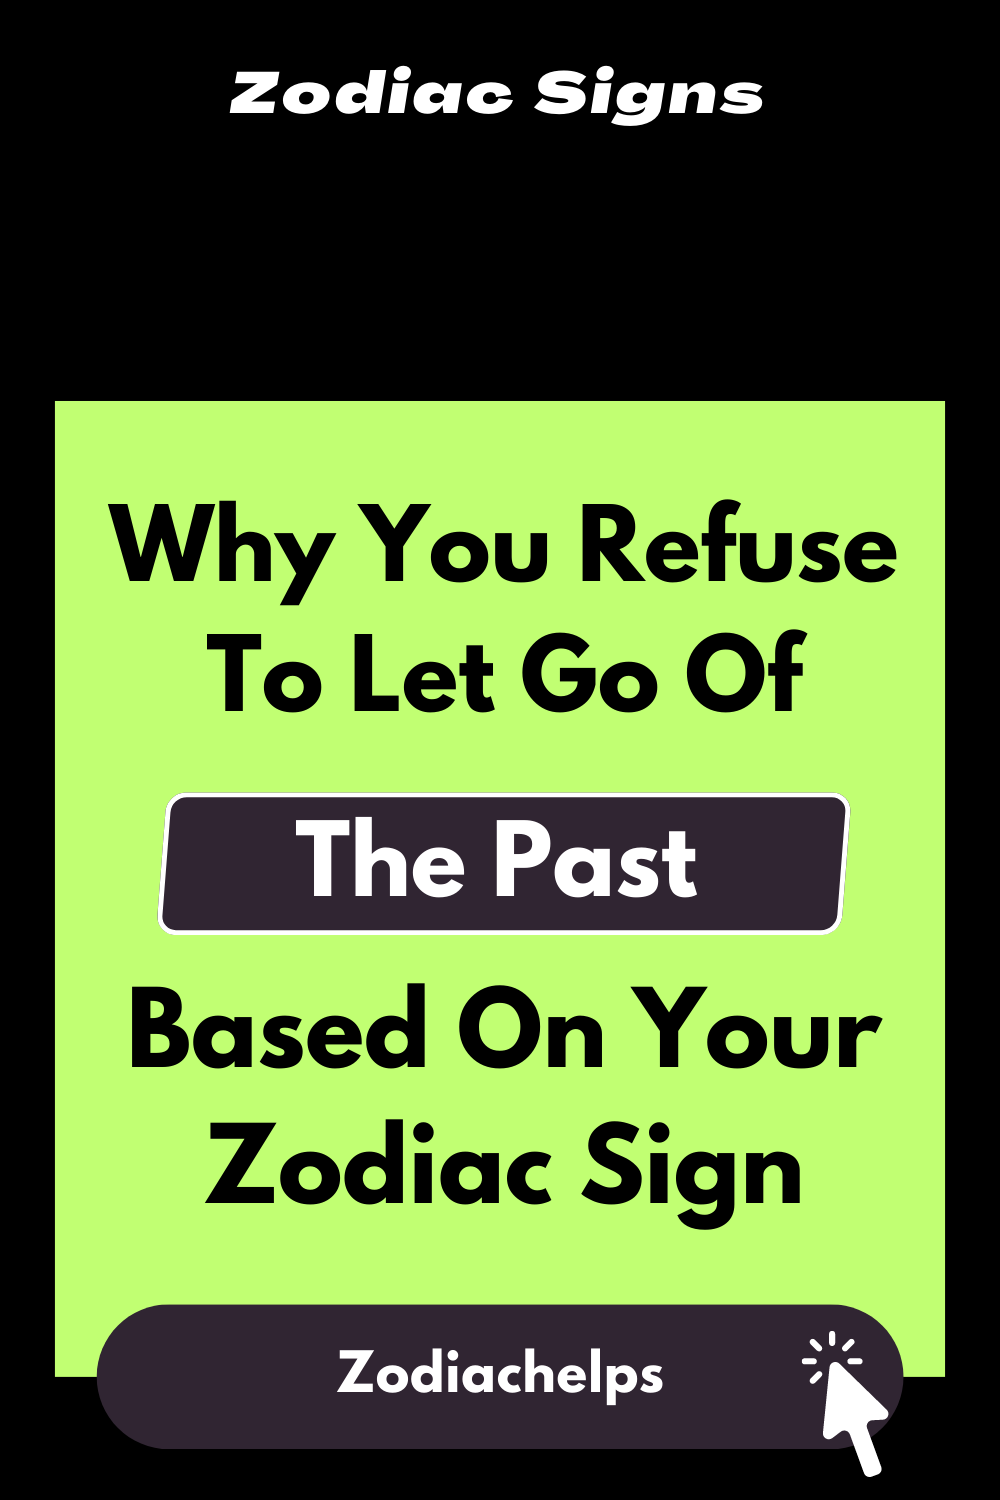 Why You Refuse To Let Go Of The Past, Based On Your Zodiac Sign